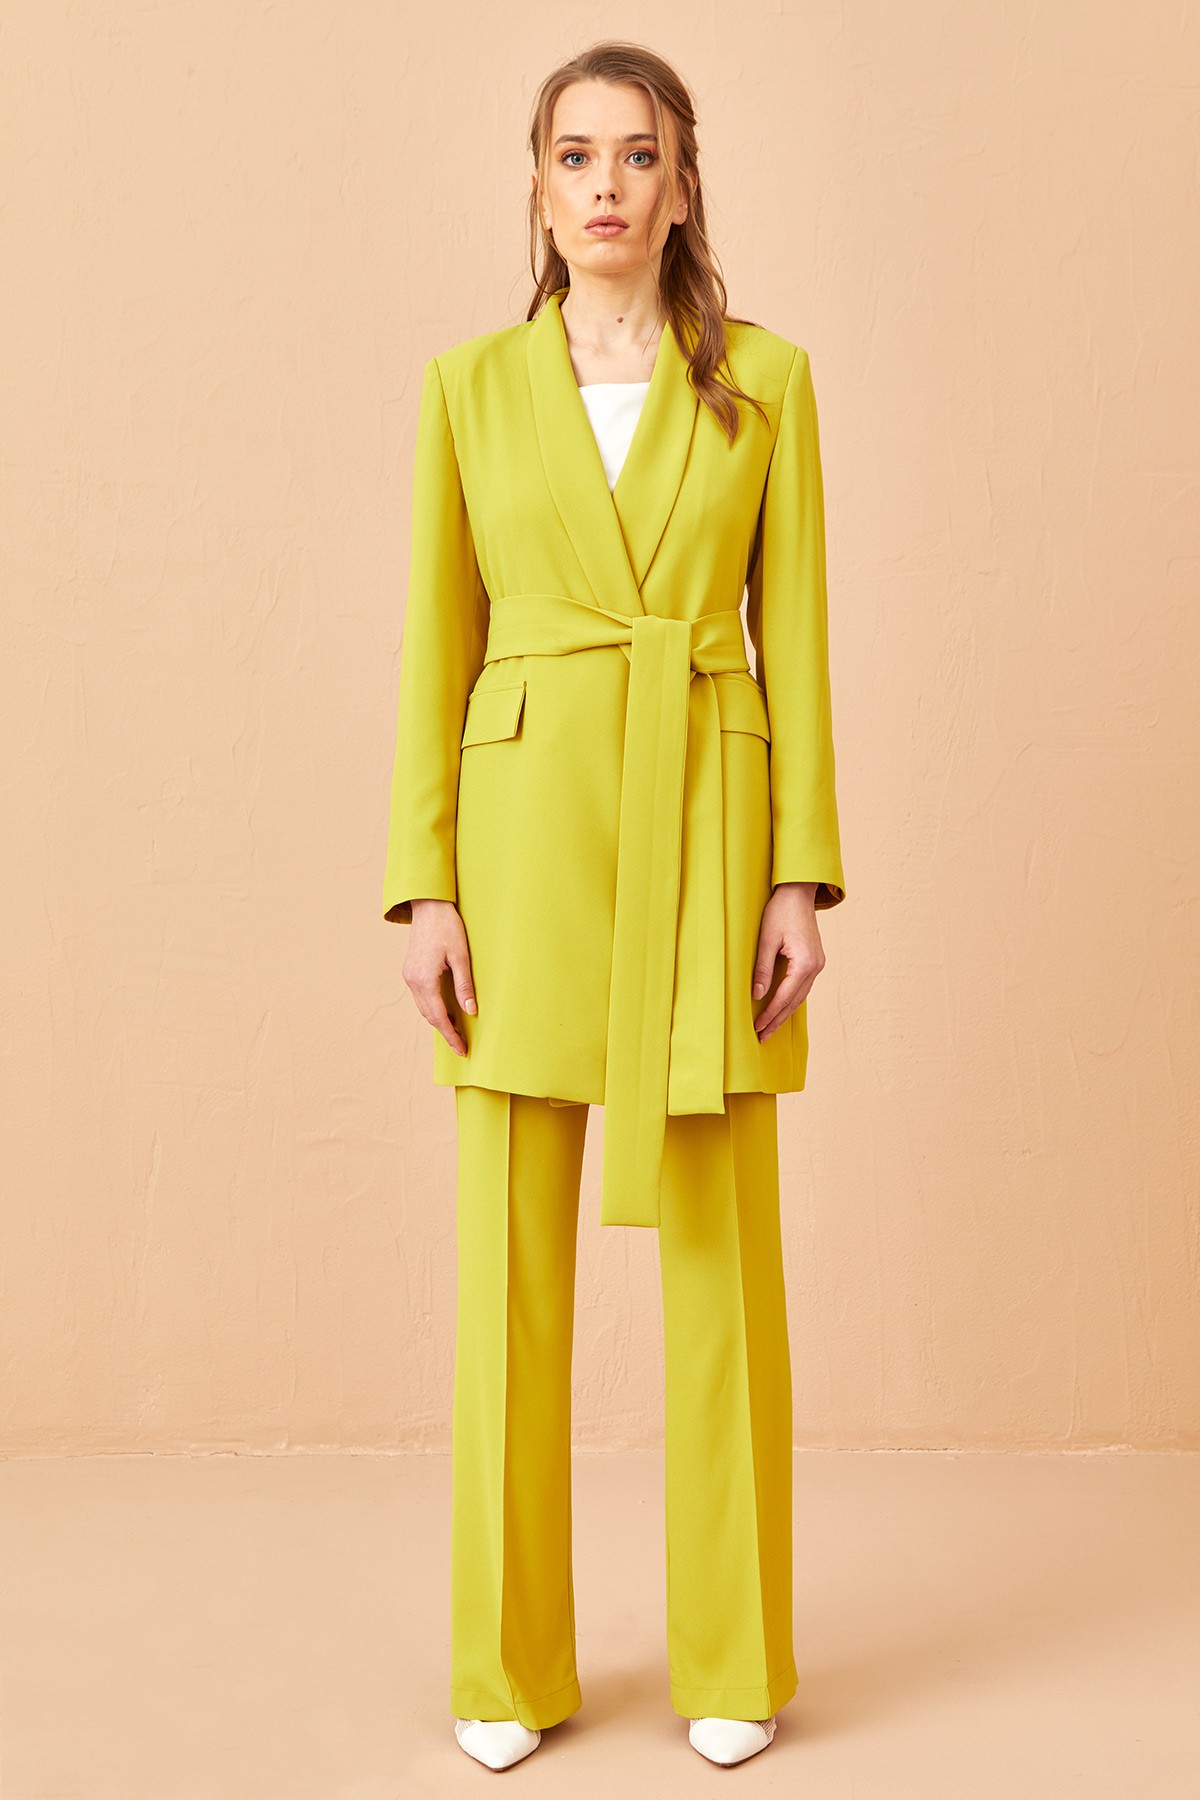 Shawl Collar With Belt Suit Yellow